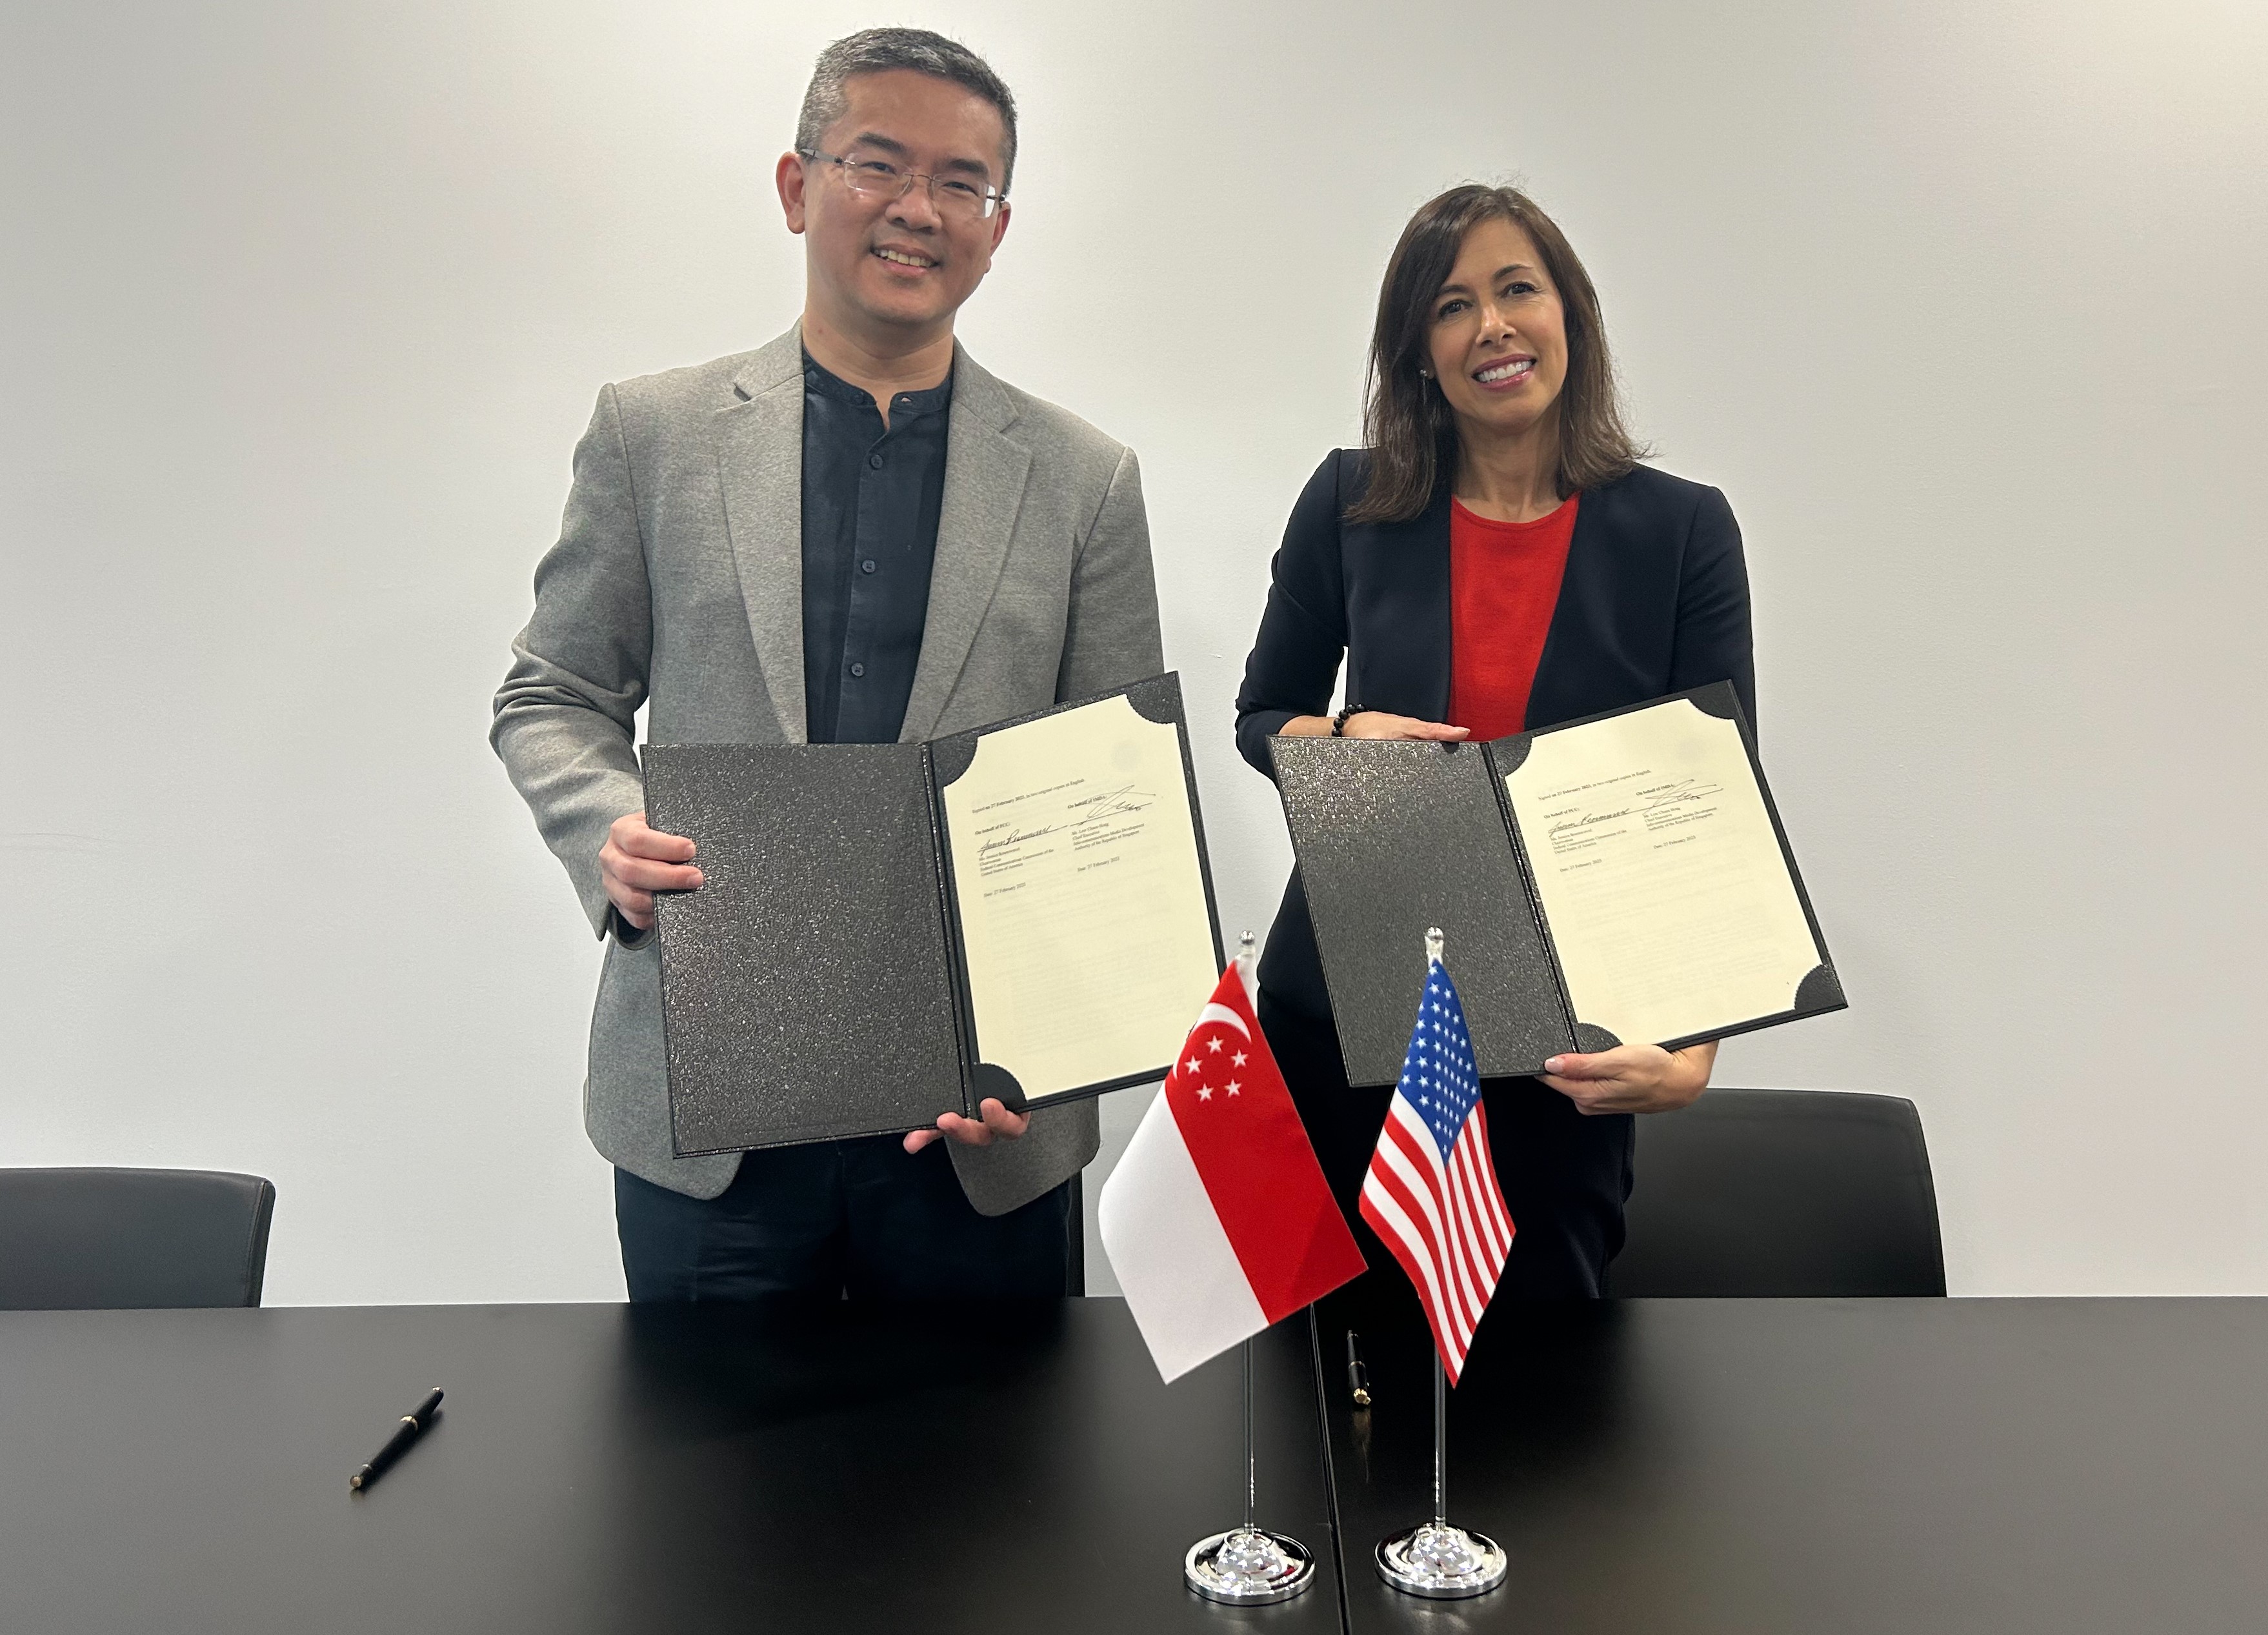 The Infocomm Media Development Authority (IMDA) of Singapore and the United States Federal Communications Commission (FCC) have signed a Memorandum of Understanding (MOU) to enhance cooperation between both countries.